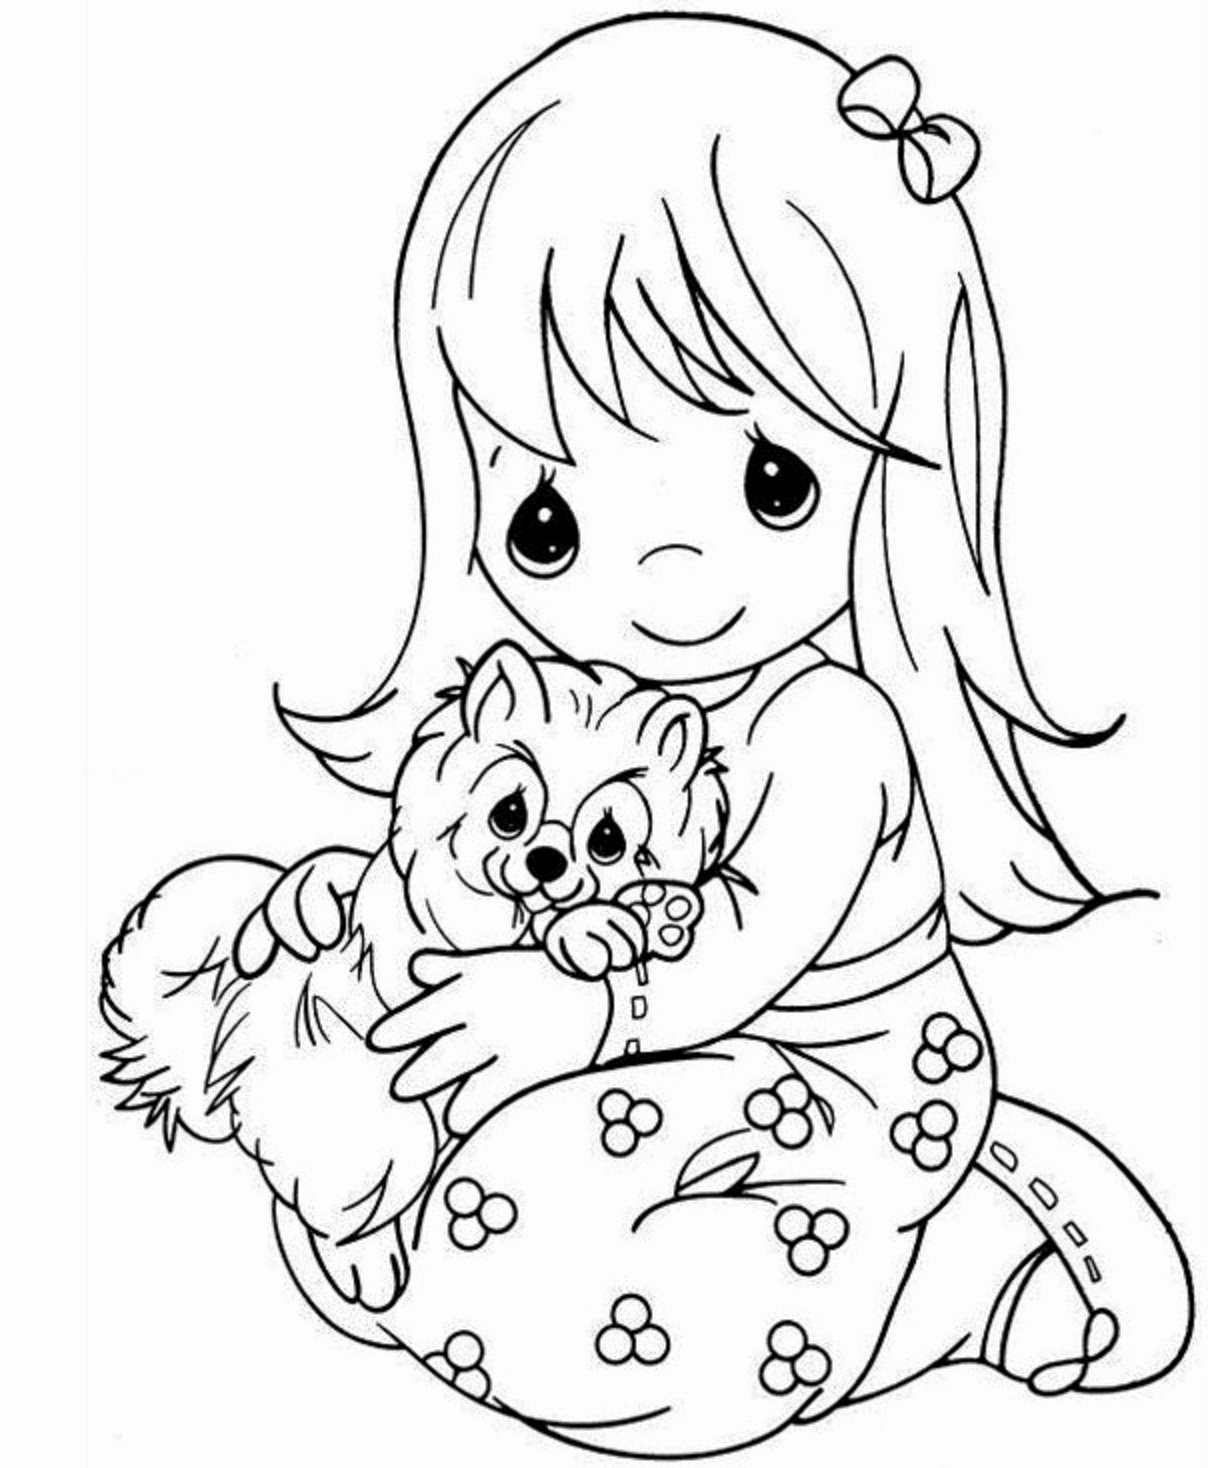 Bathroom Design Outstanding Drawing And Coloring Pages - Jojo Siwa Coloring Pages - HD Wallpaper 